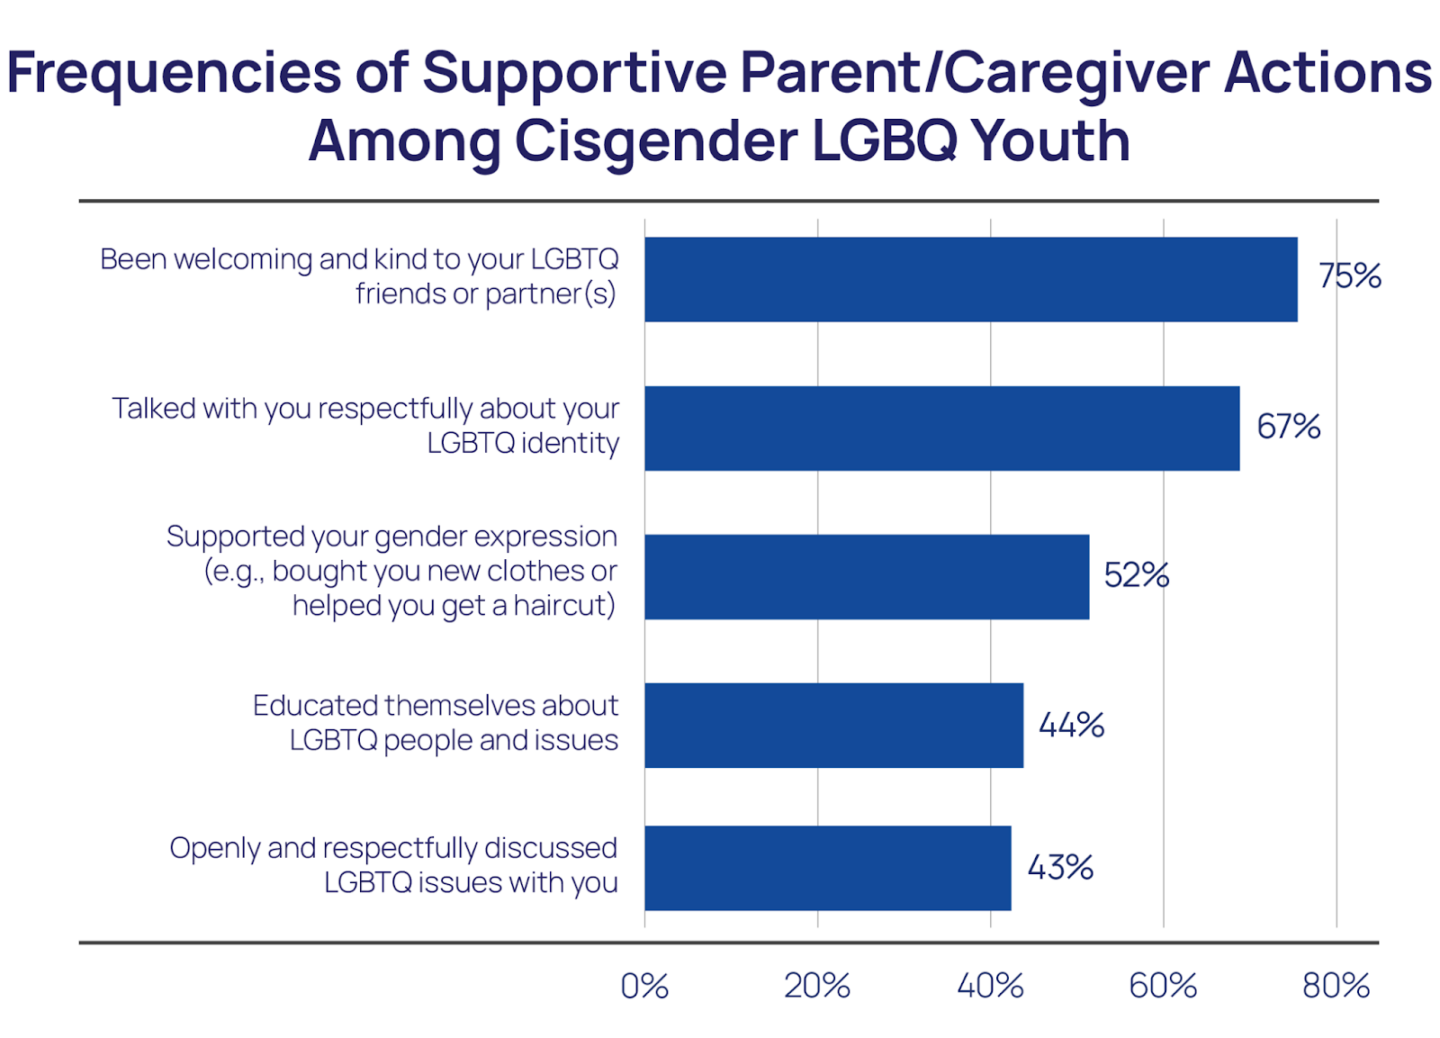 Frequencies of Supportive Parent/Caregiver Actions Among Cisgender LGBQ Youth bar chart